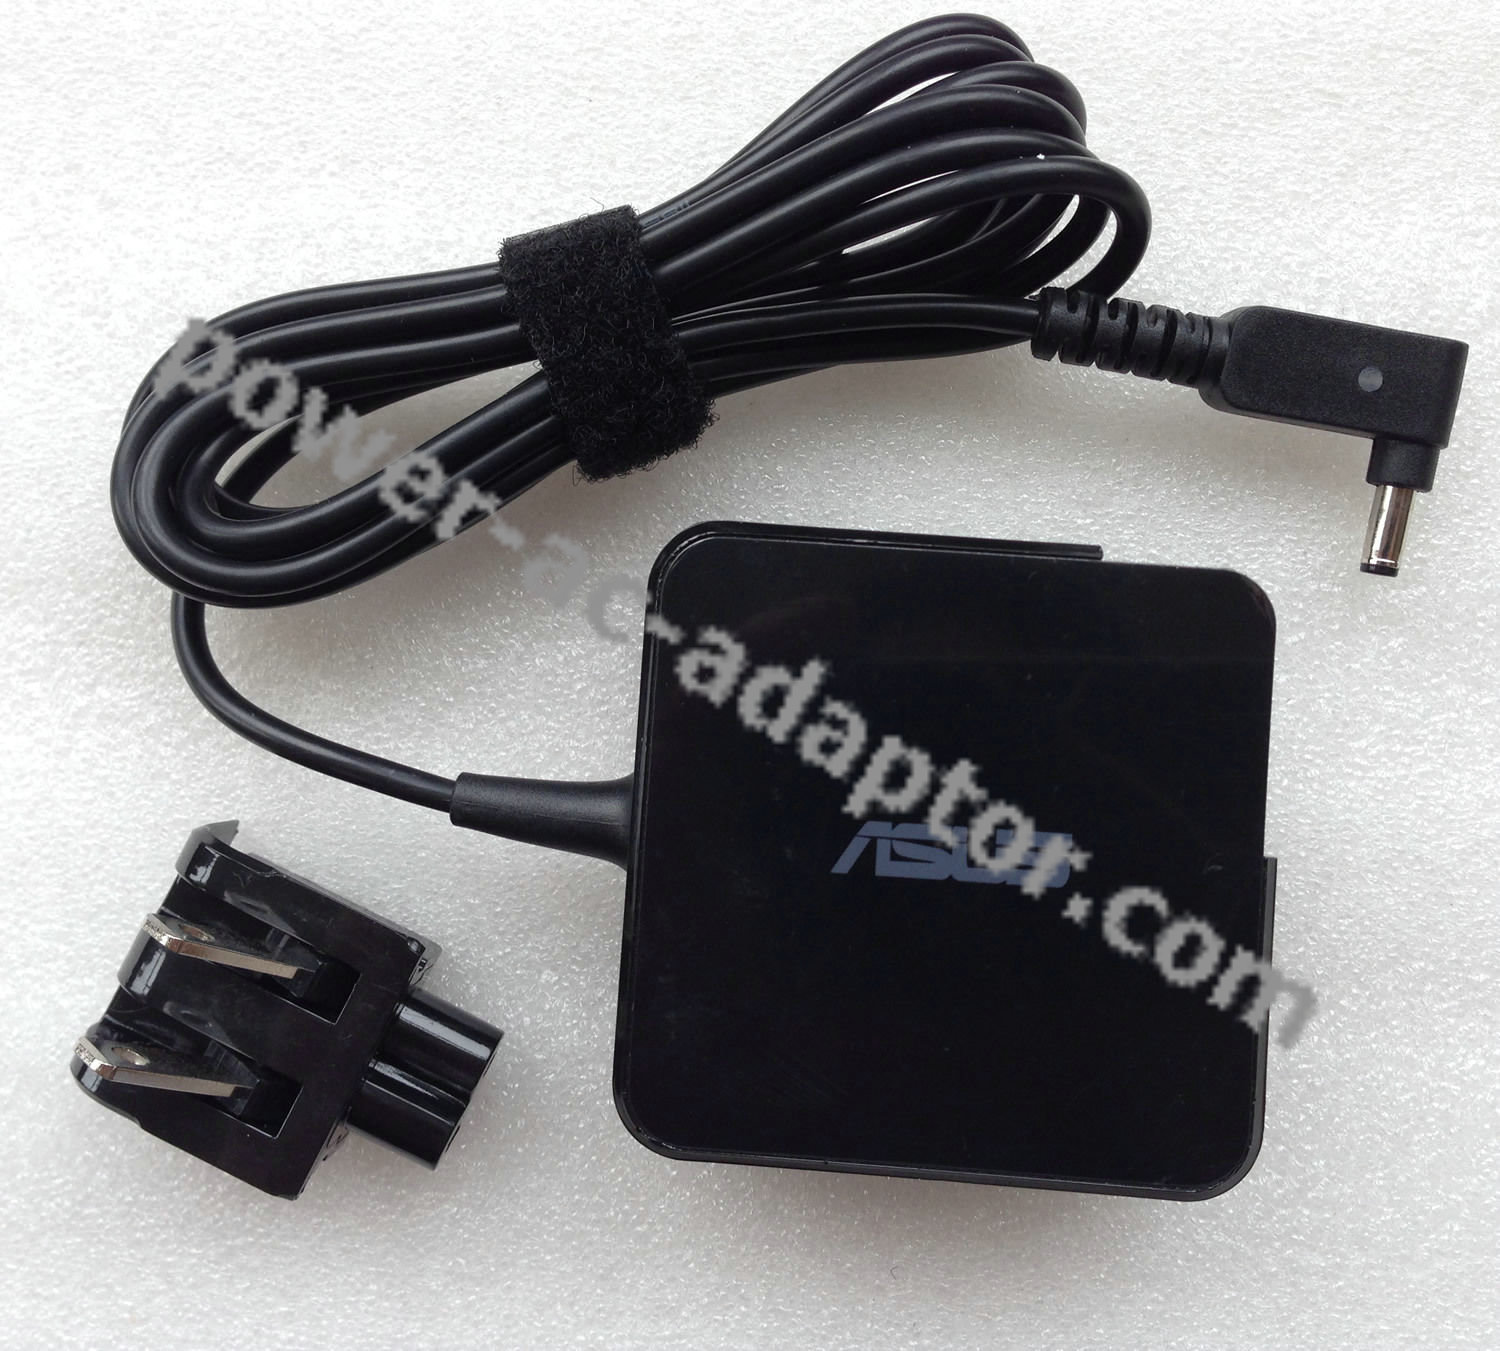 OEM ASUS 33W AC Power Adapter for ASUS X200CA-KX187D Notebook